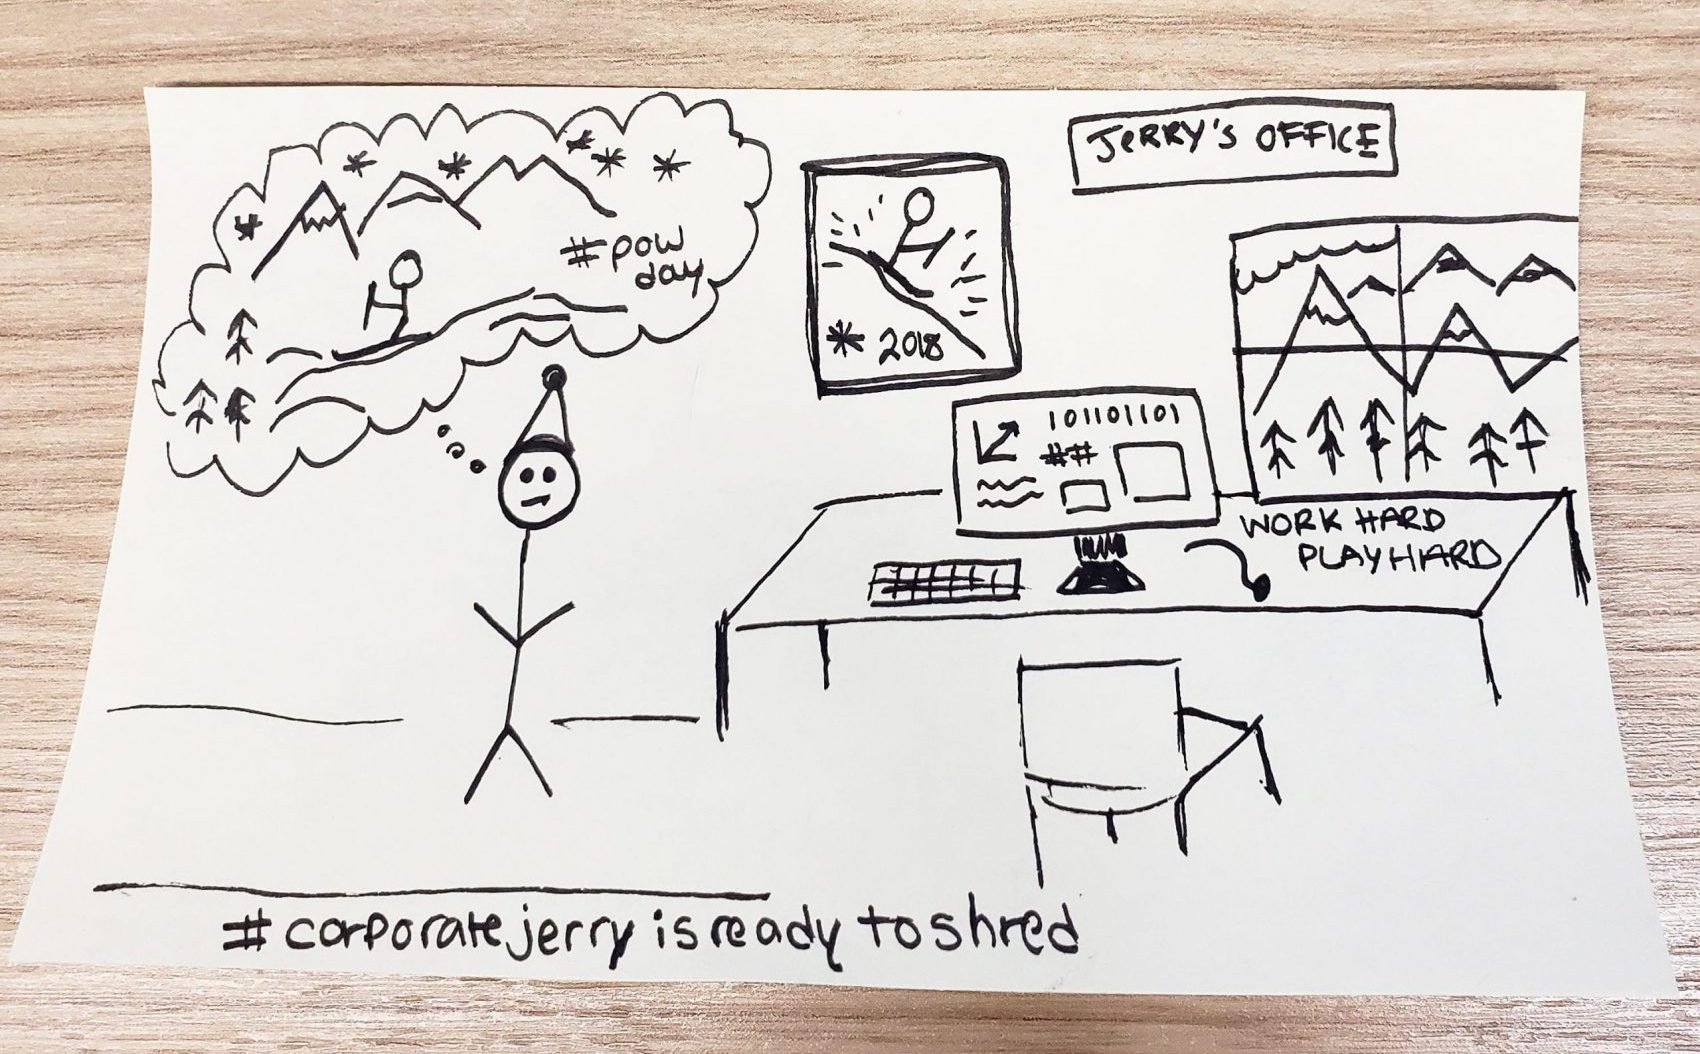 Comic of Corporate Jerry daydreaming